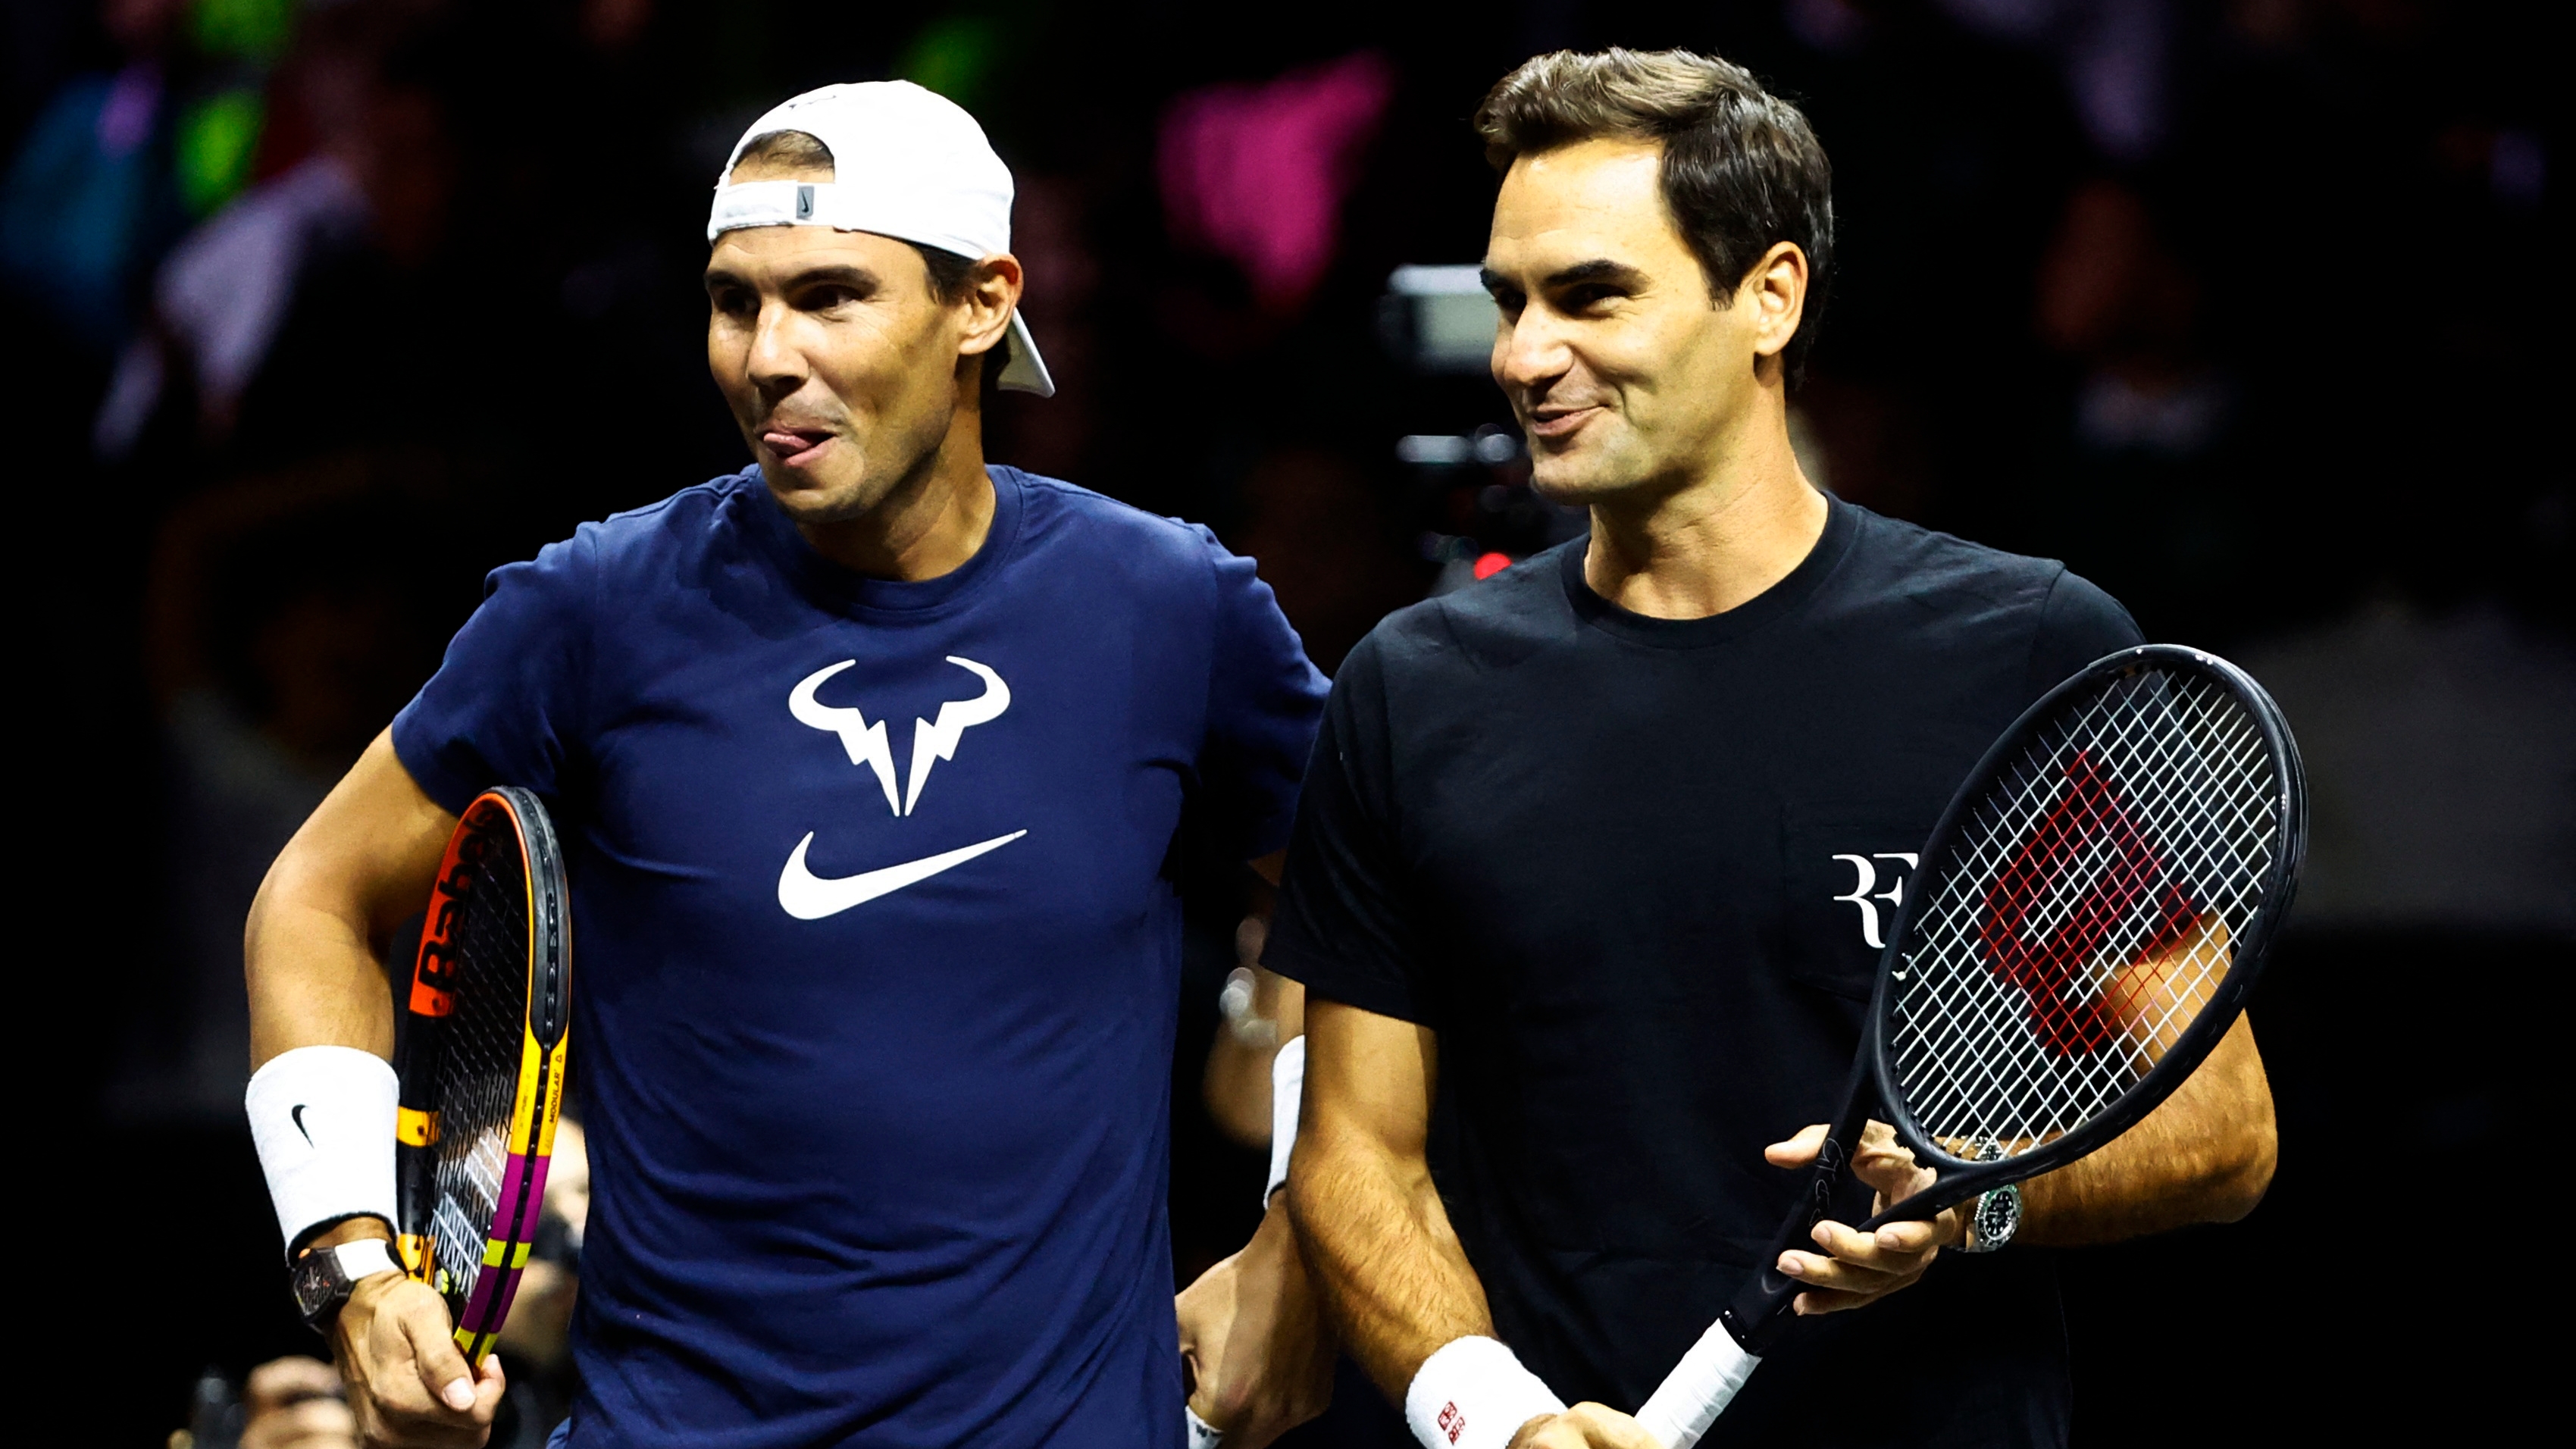 Federer retires from tennis playing a doubles match with Nadal for the Laver Cup in London against Americans Jack Sock and Frances Tiafoe 